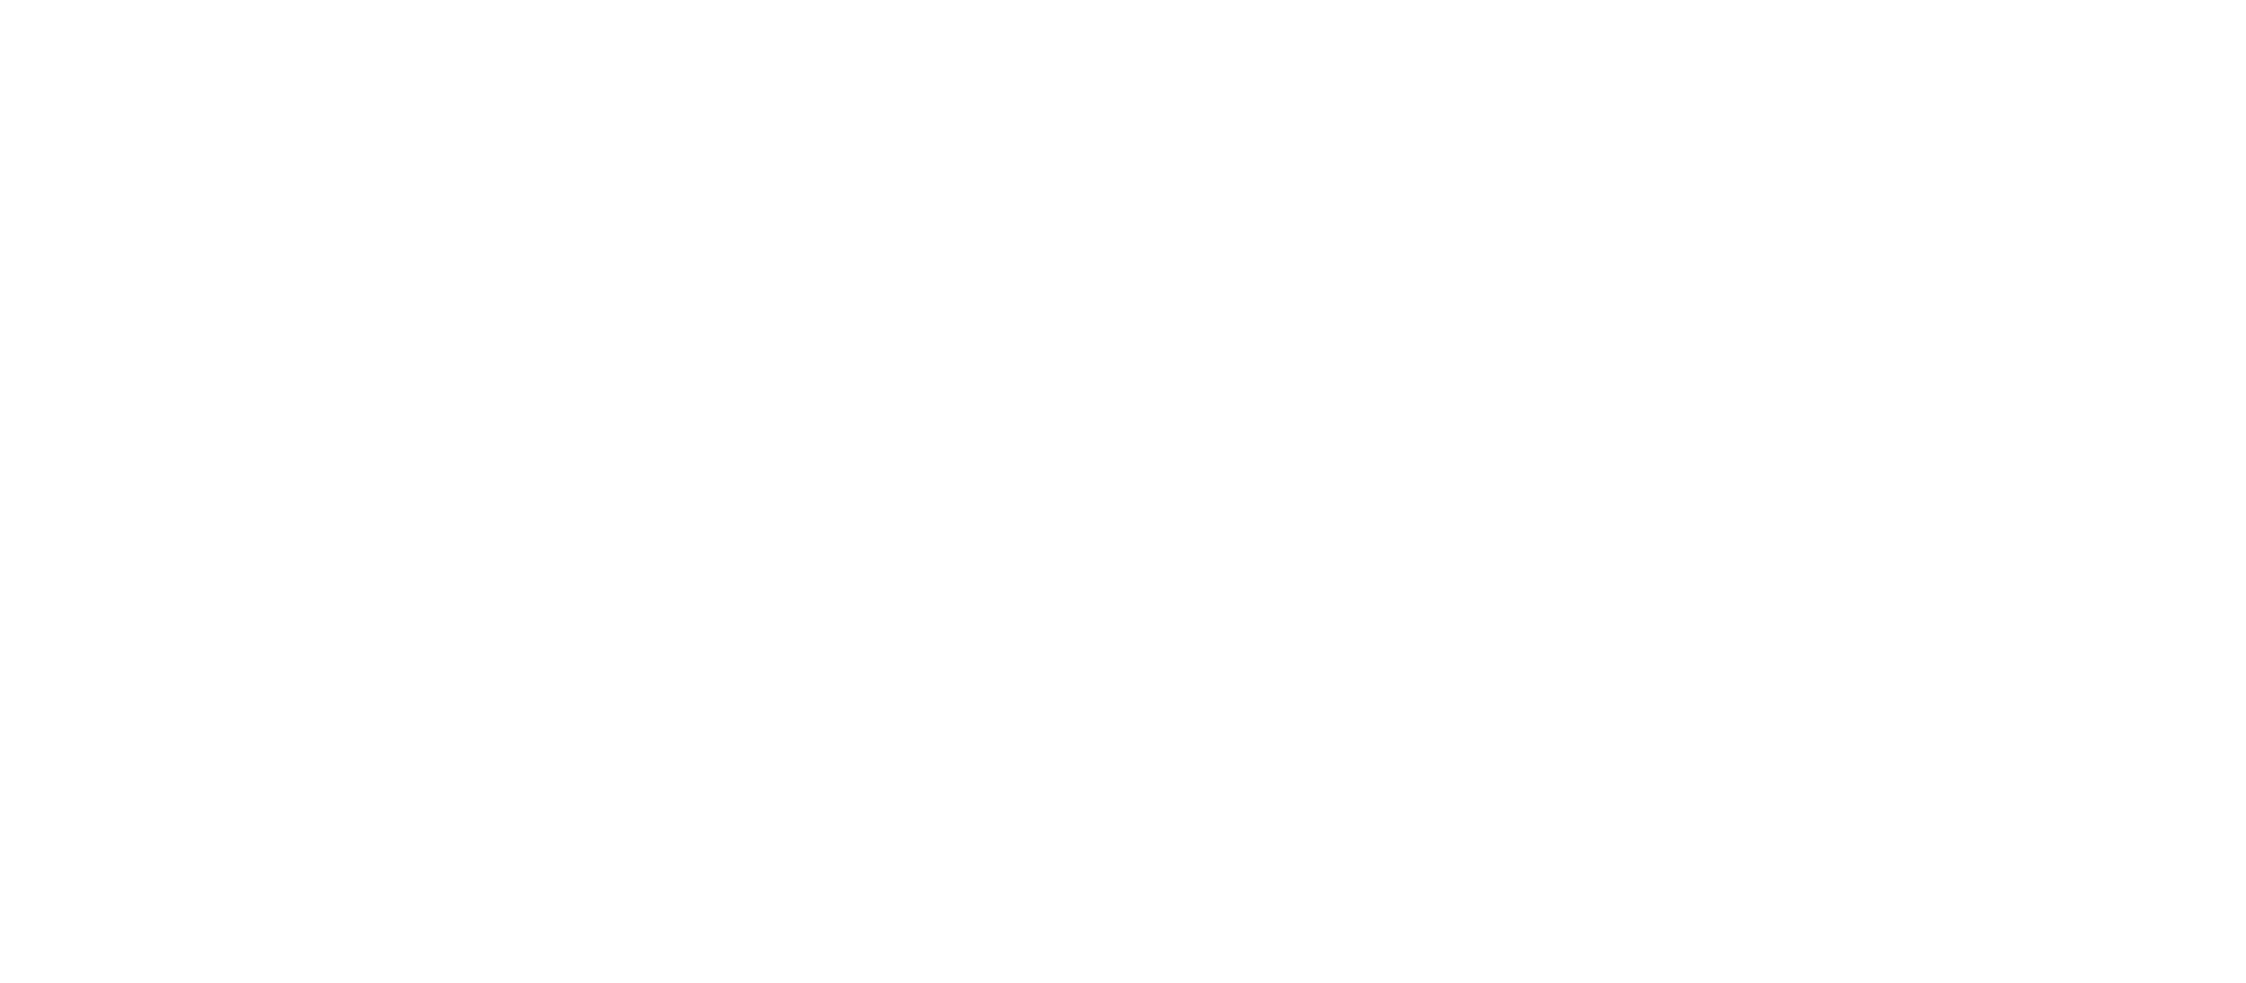 Ibaia Immobilier